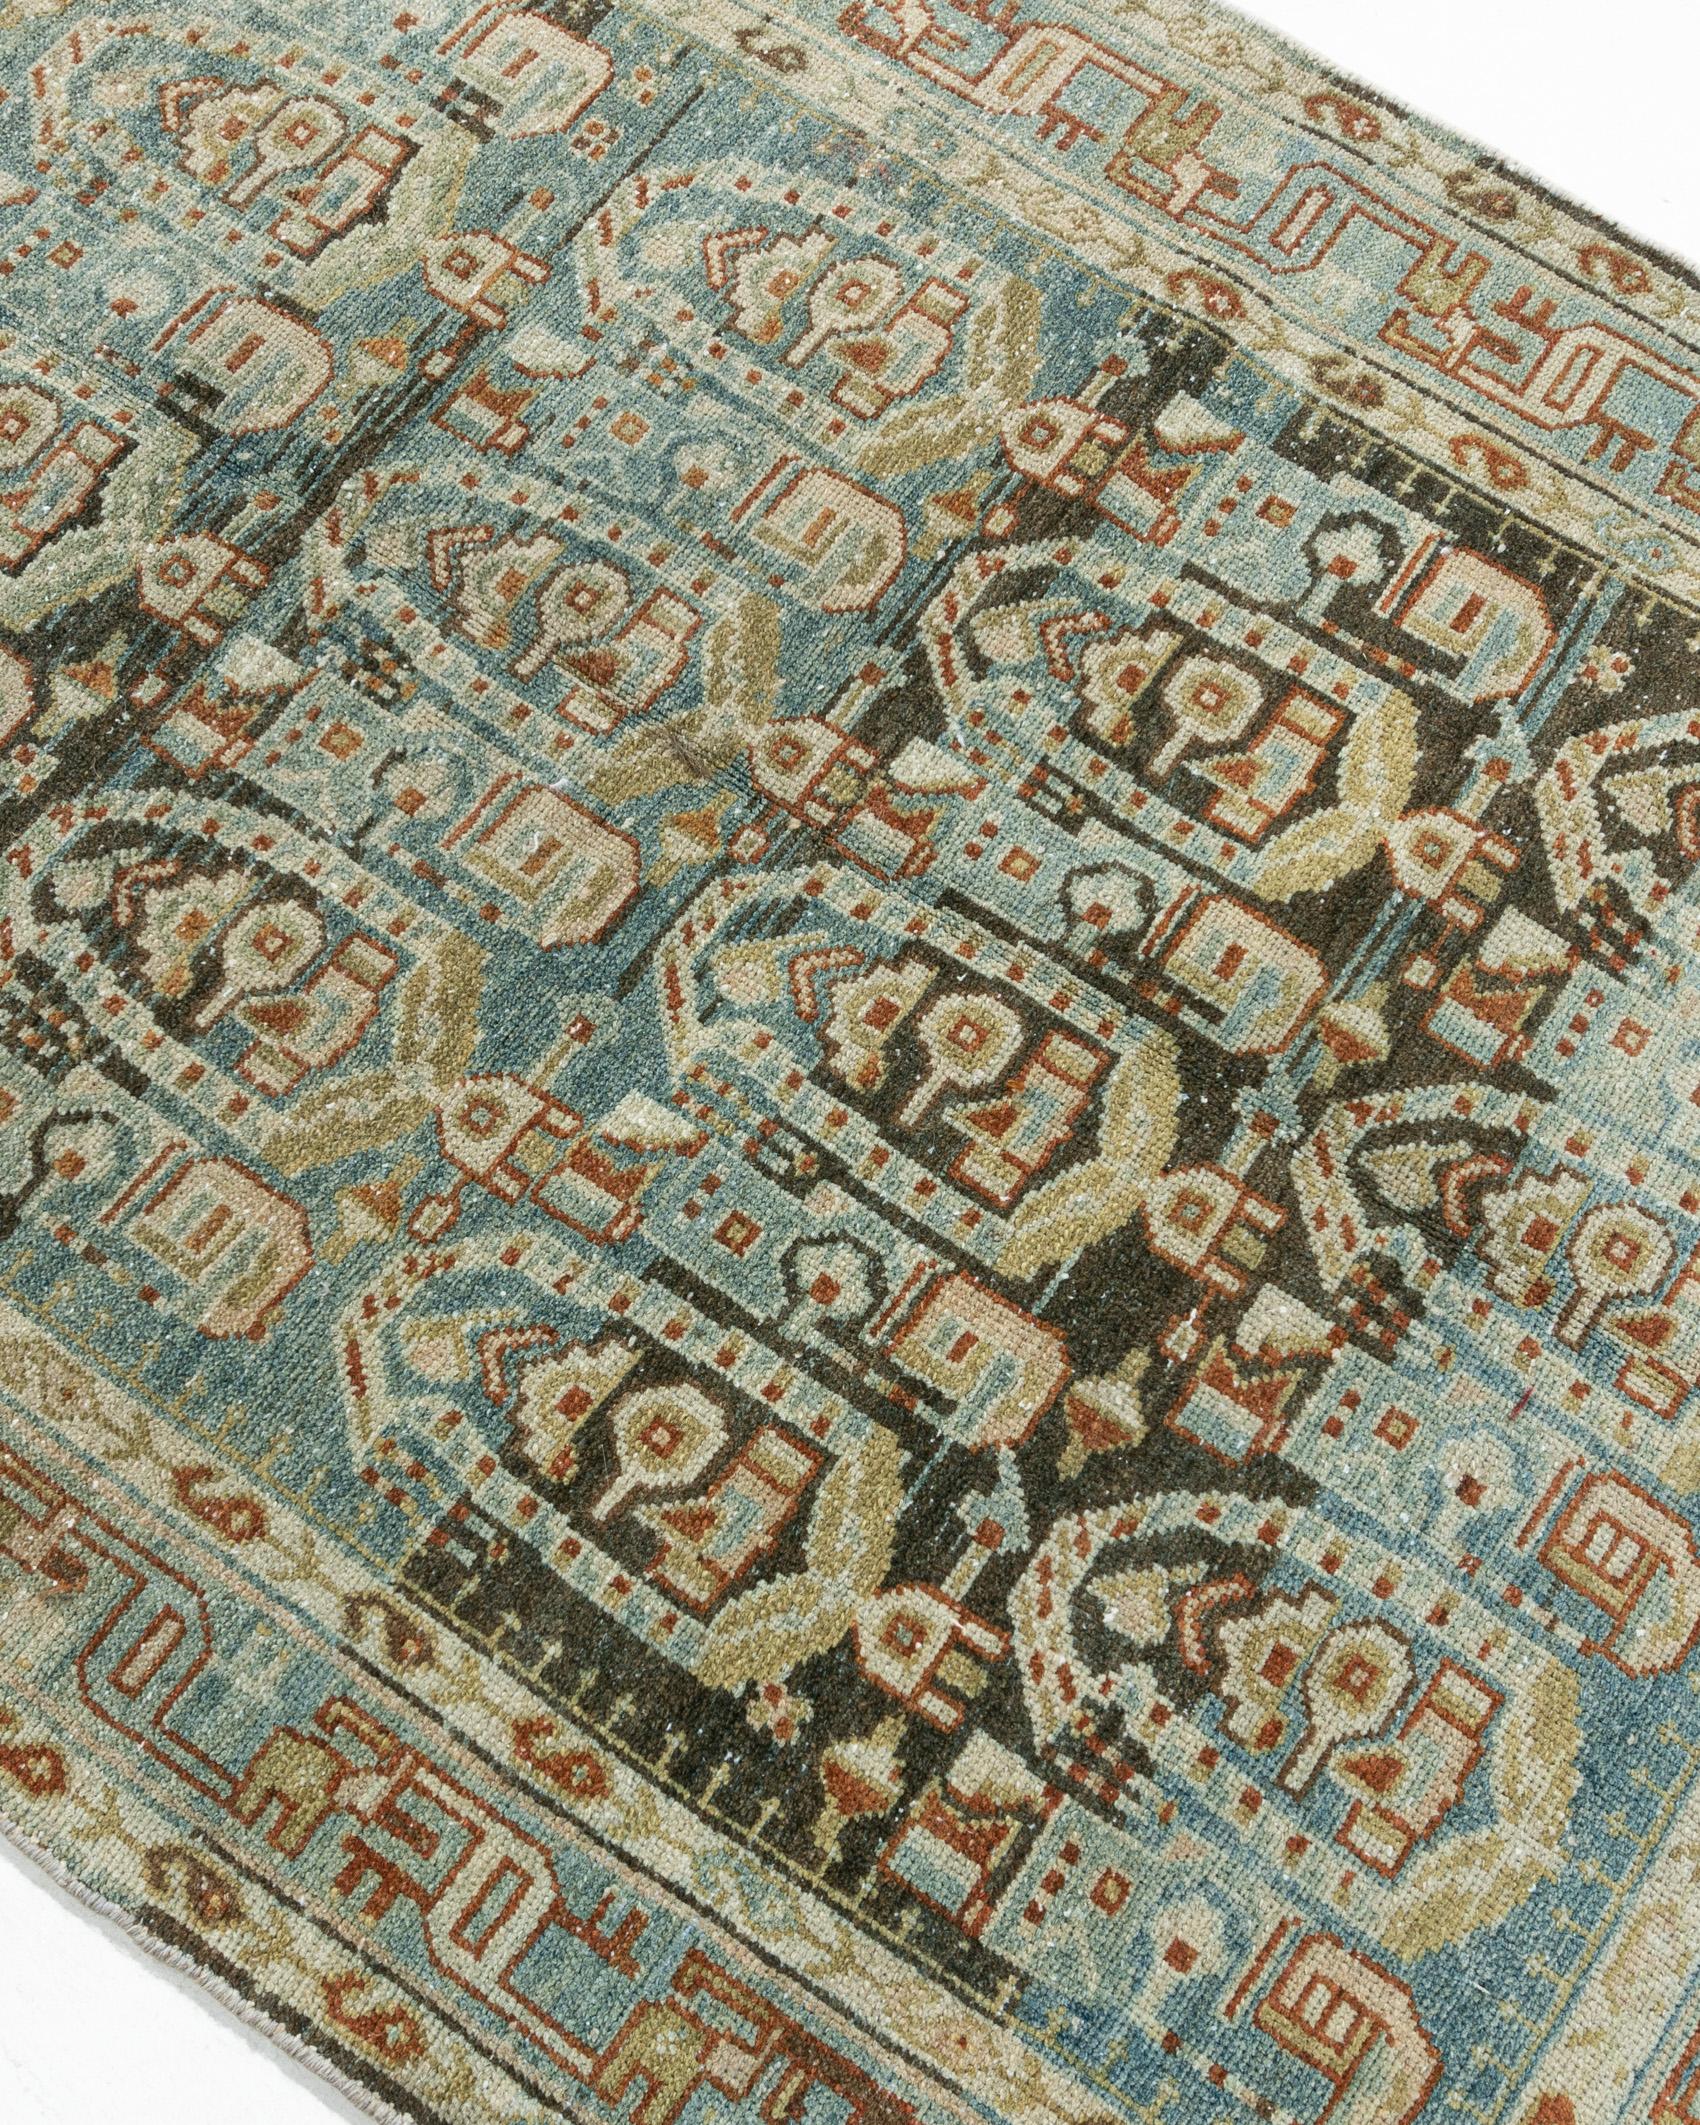 Antique Persian Malayer Area Rug 3'6 x 5' For Sale 3